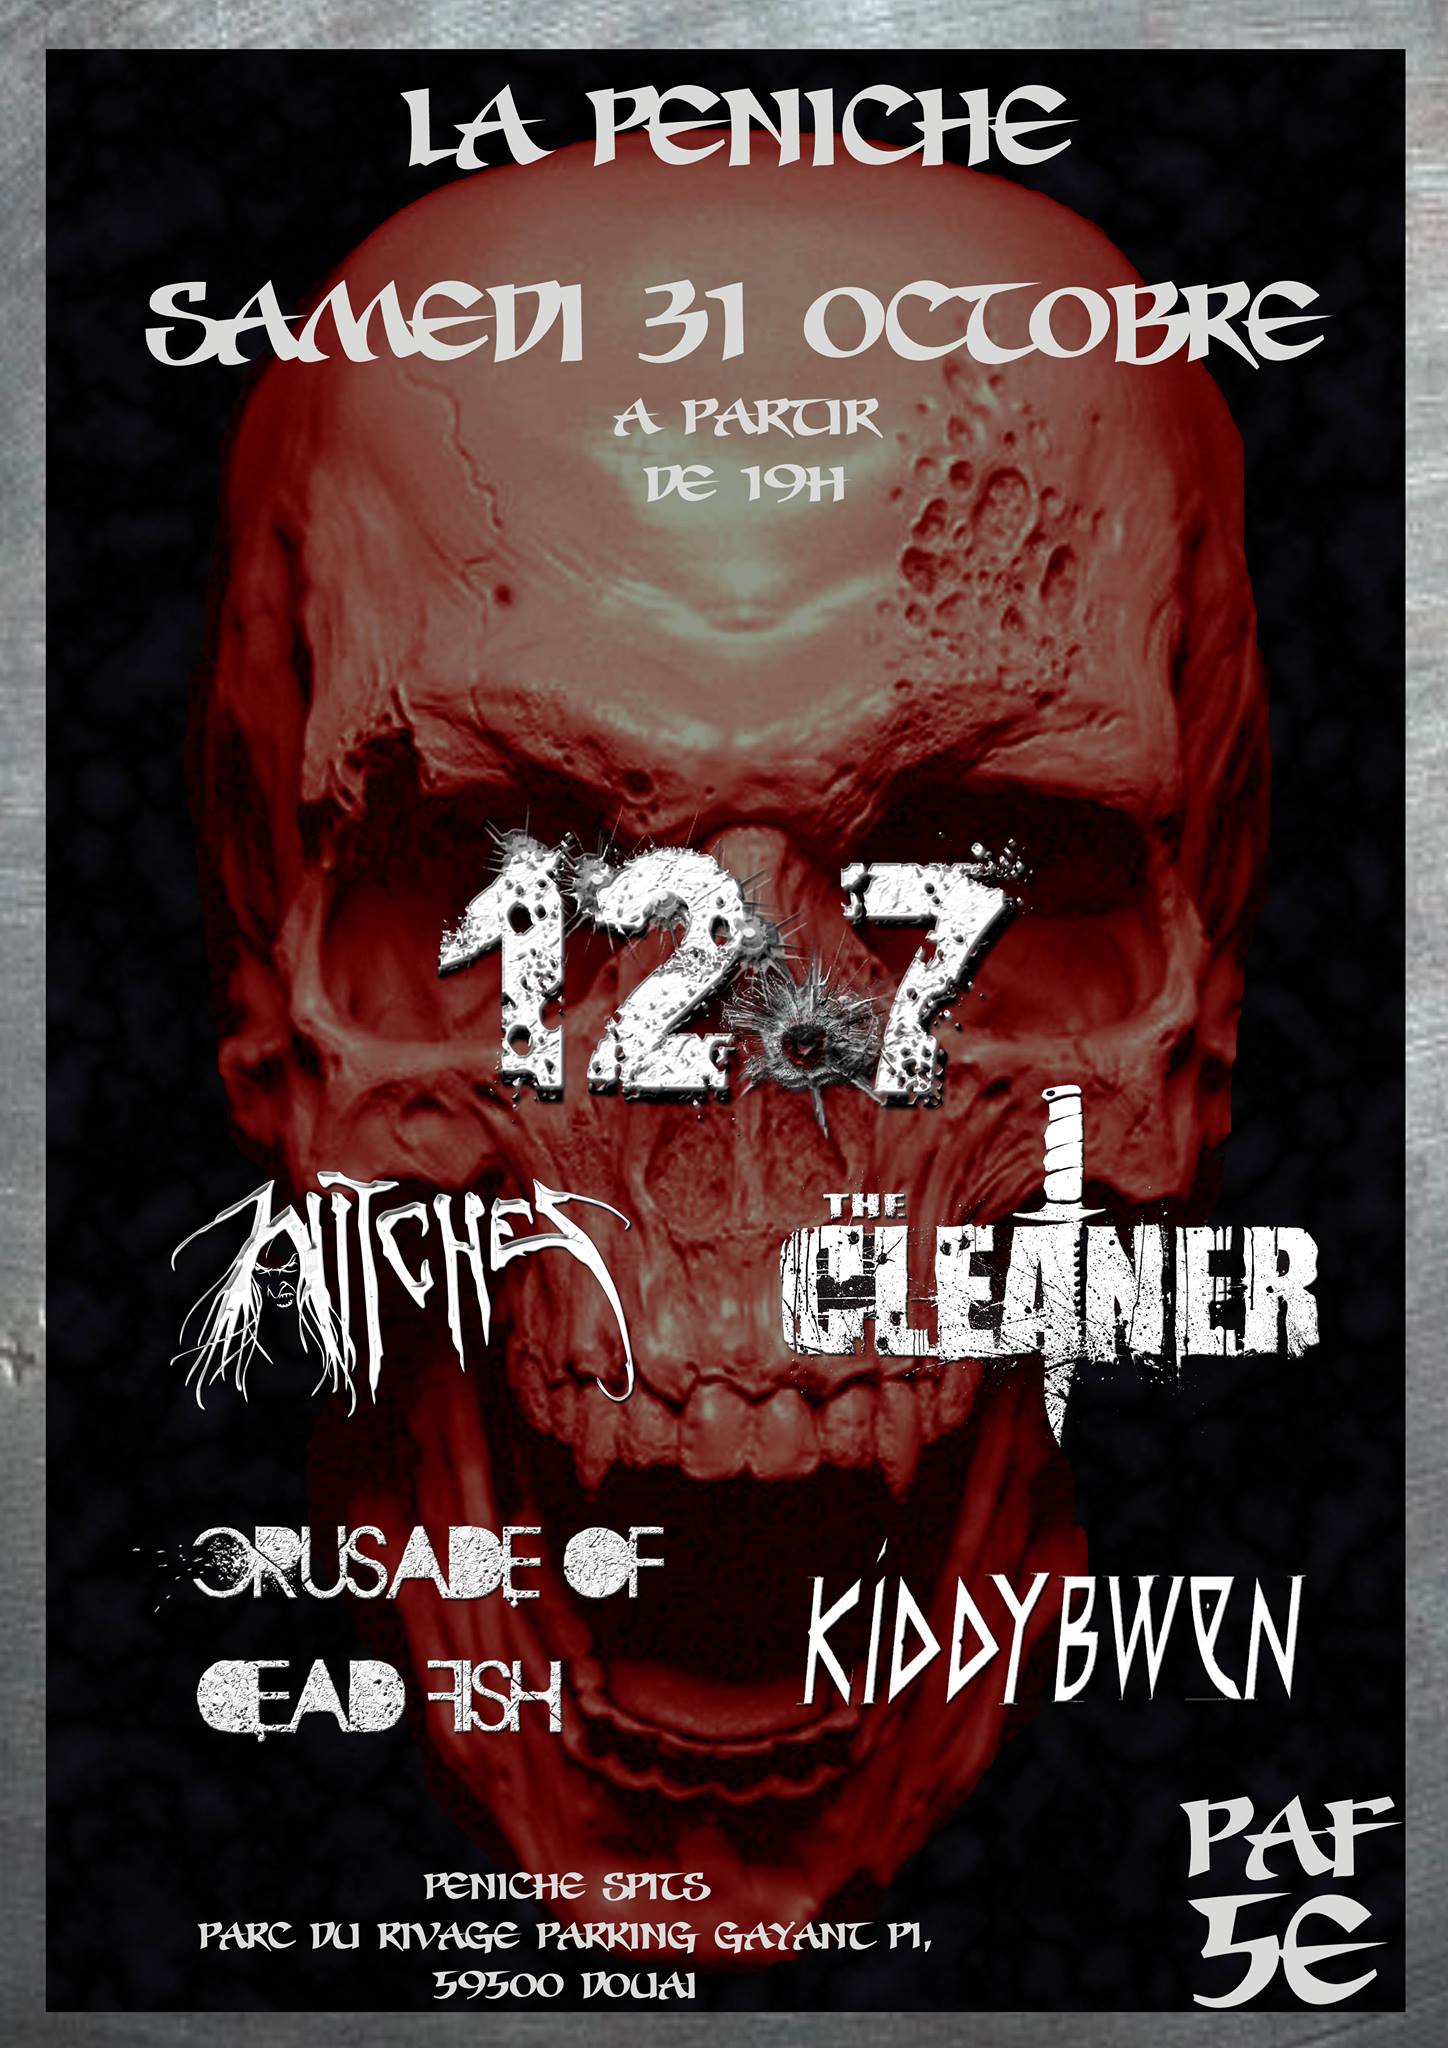 Witches flyer 12.7 + Witches + The Cleaner + Crusade of Dead Fish + Kiddybwen @ European Tour La Pniche Igelrock Douai (62), France